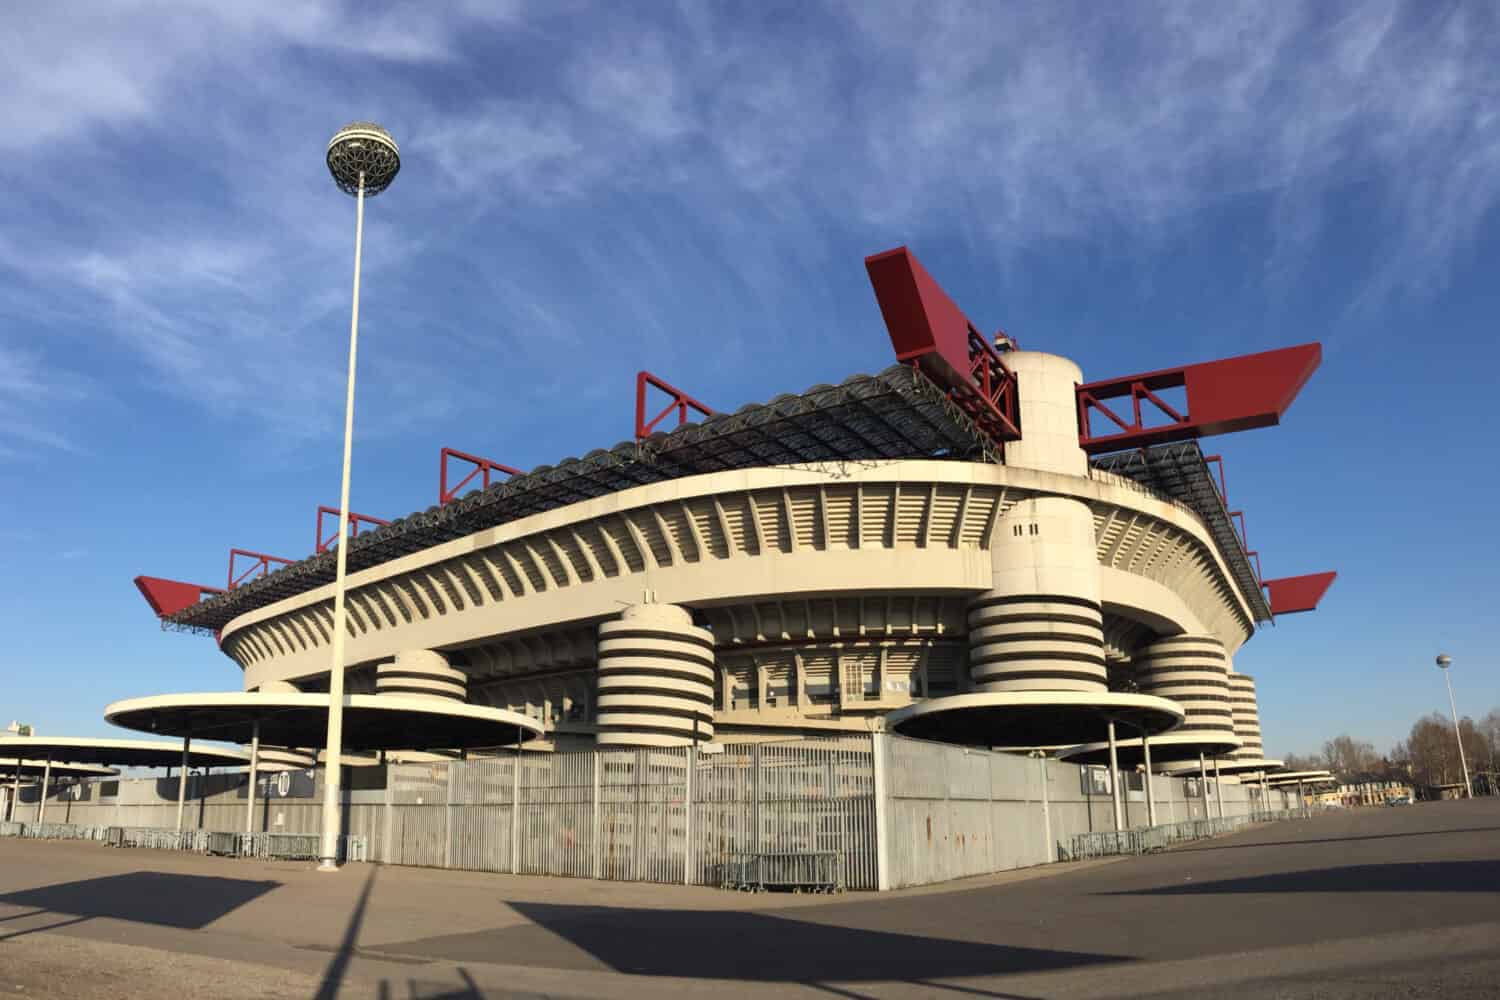 <p>San Siro is Italy’s largest football stadium and Europe’s ninth-largest stadium. It was constructed in only 13 months. The stadium has a seating capacity of 80,018. AC Milan and Inter Milan, two premier Italian football clubs, use San Siro as their home ground. The stadium location, in the middle of Milan, makes it easily accessible for the fans of both clubs to support their teams. </p><p>Remember to scroll up and hit the ‘Follow’ button to keep up with the newest stories from Seattle Travel on your Microsoft Start feed or MSN homepage!</p>